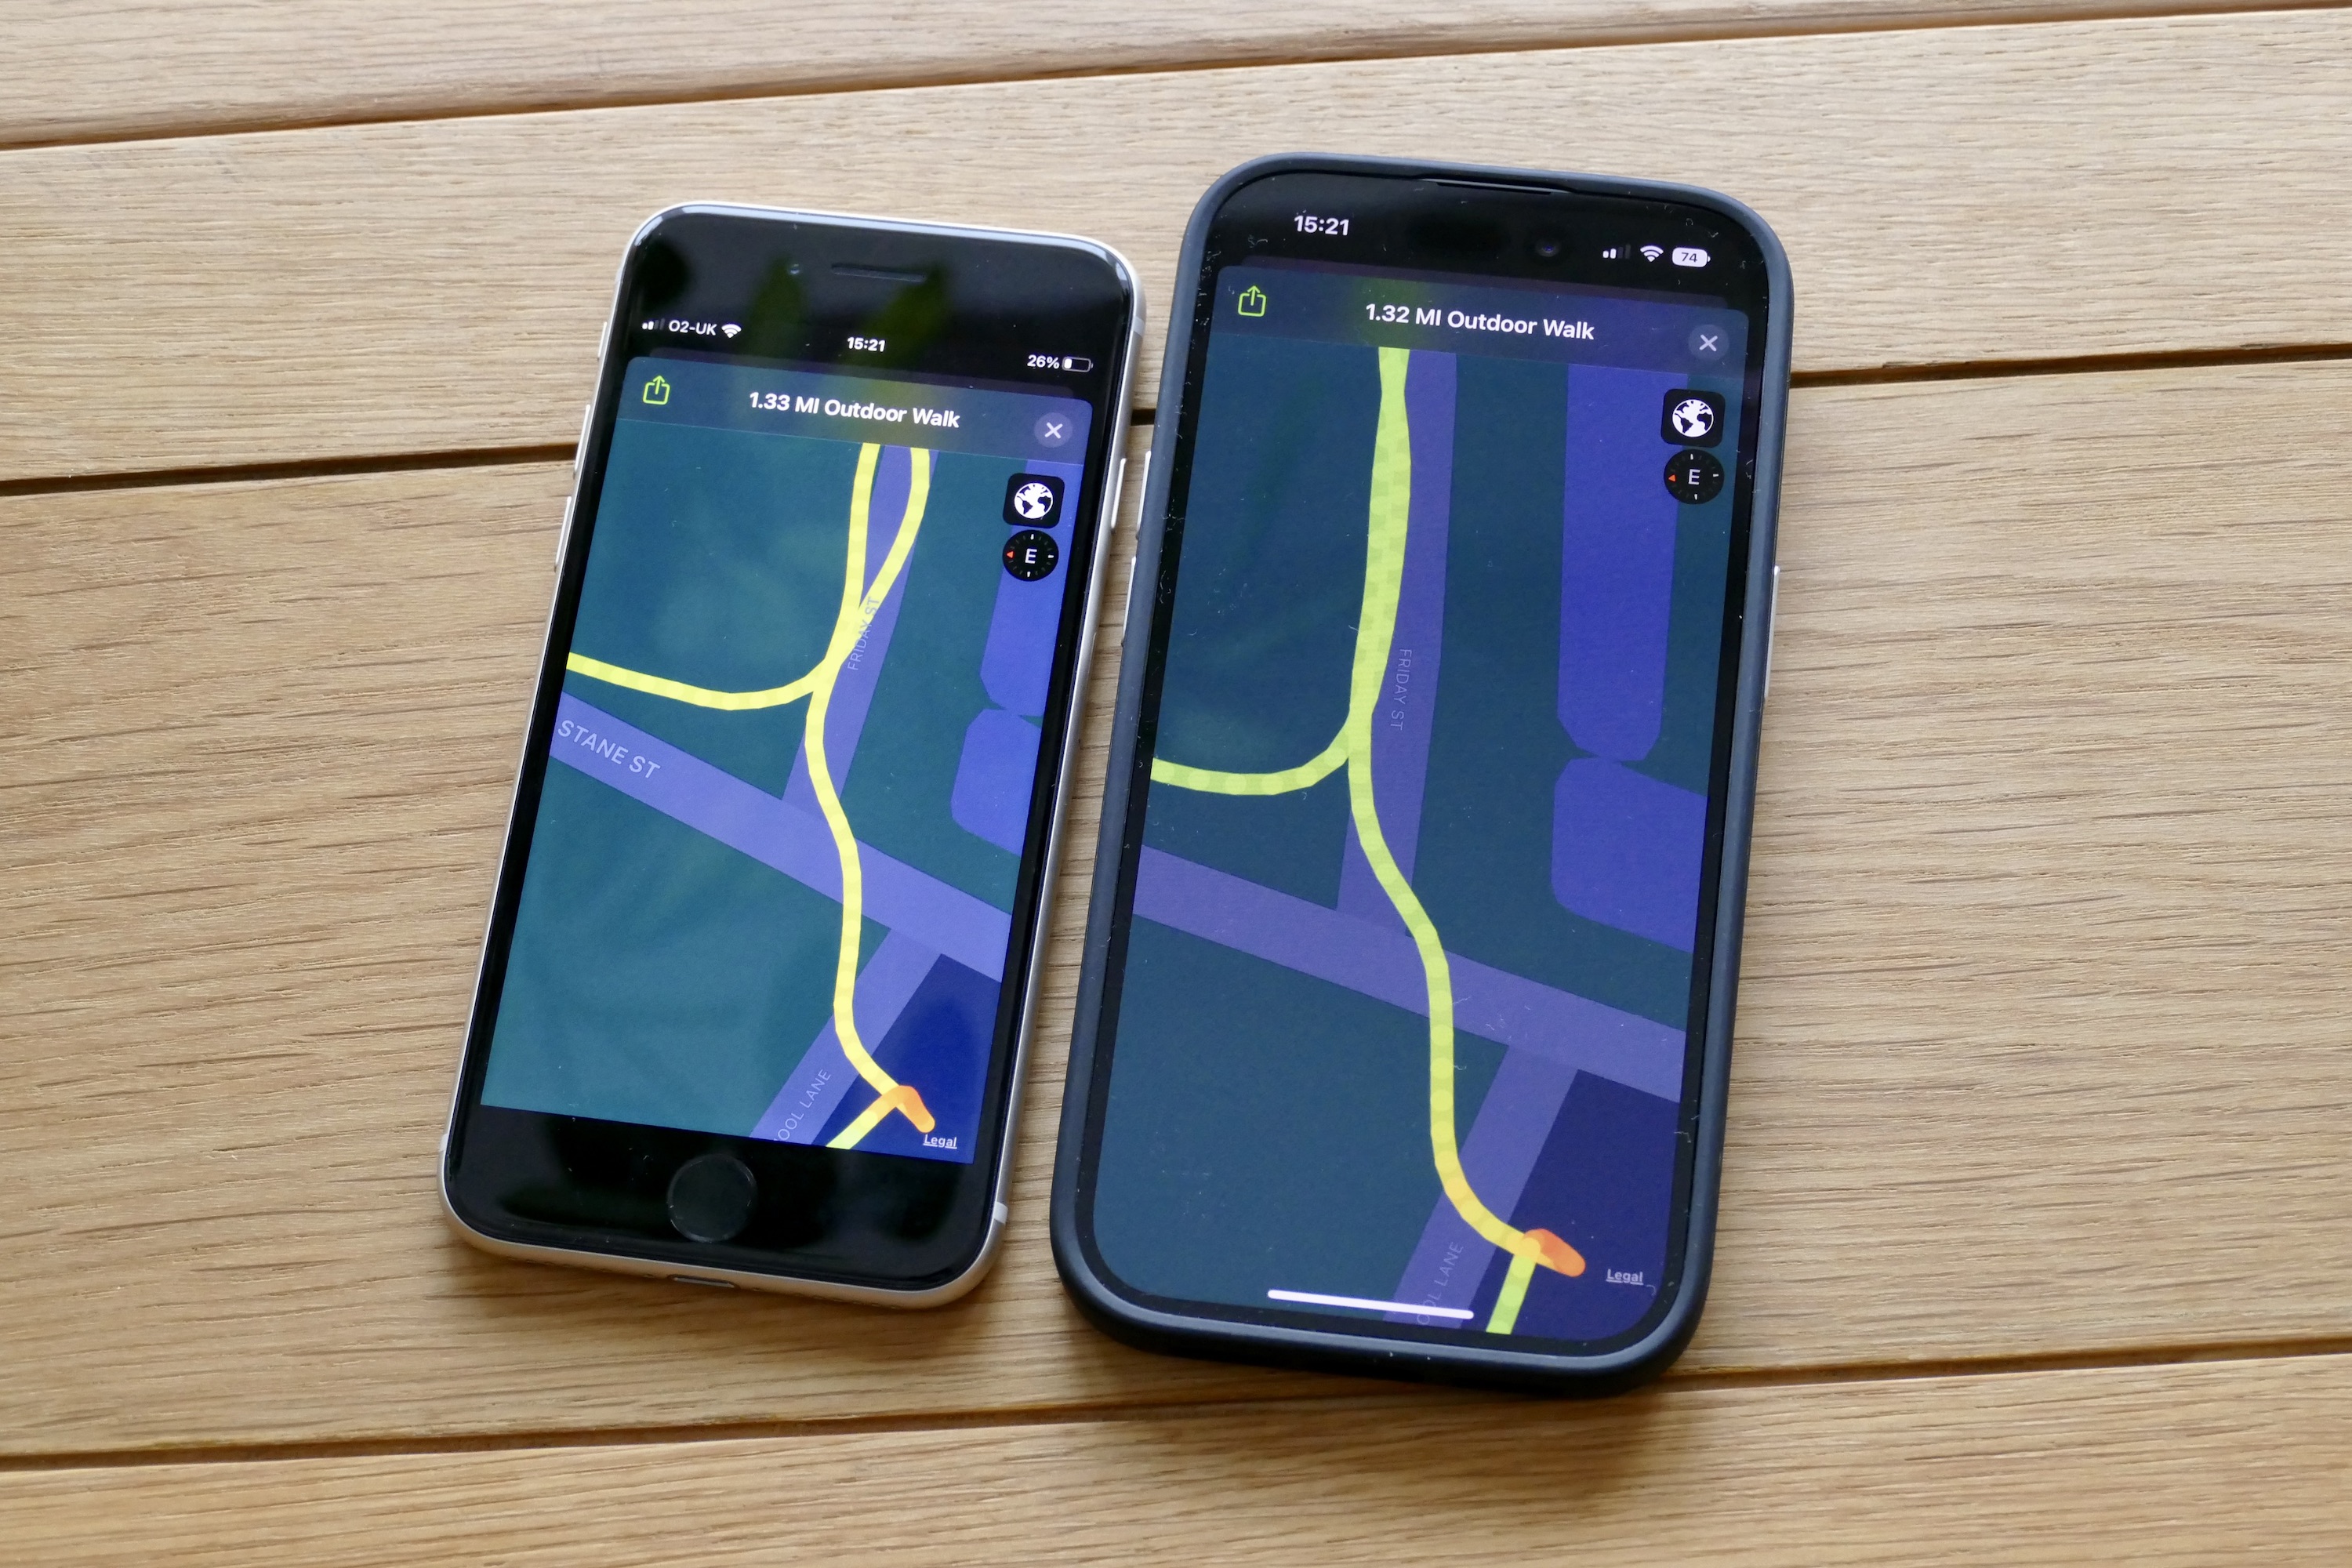 GPS map data from an Apple Watch Ultra and the Apple Watch Series 8 shown on an iPhone 14 Pro and iPhone SE 2022.